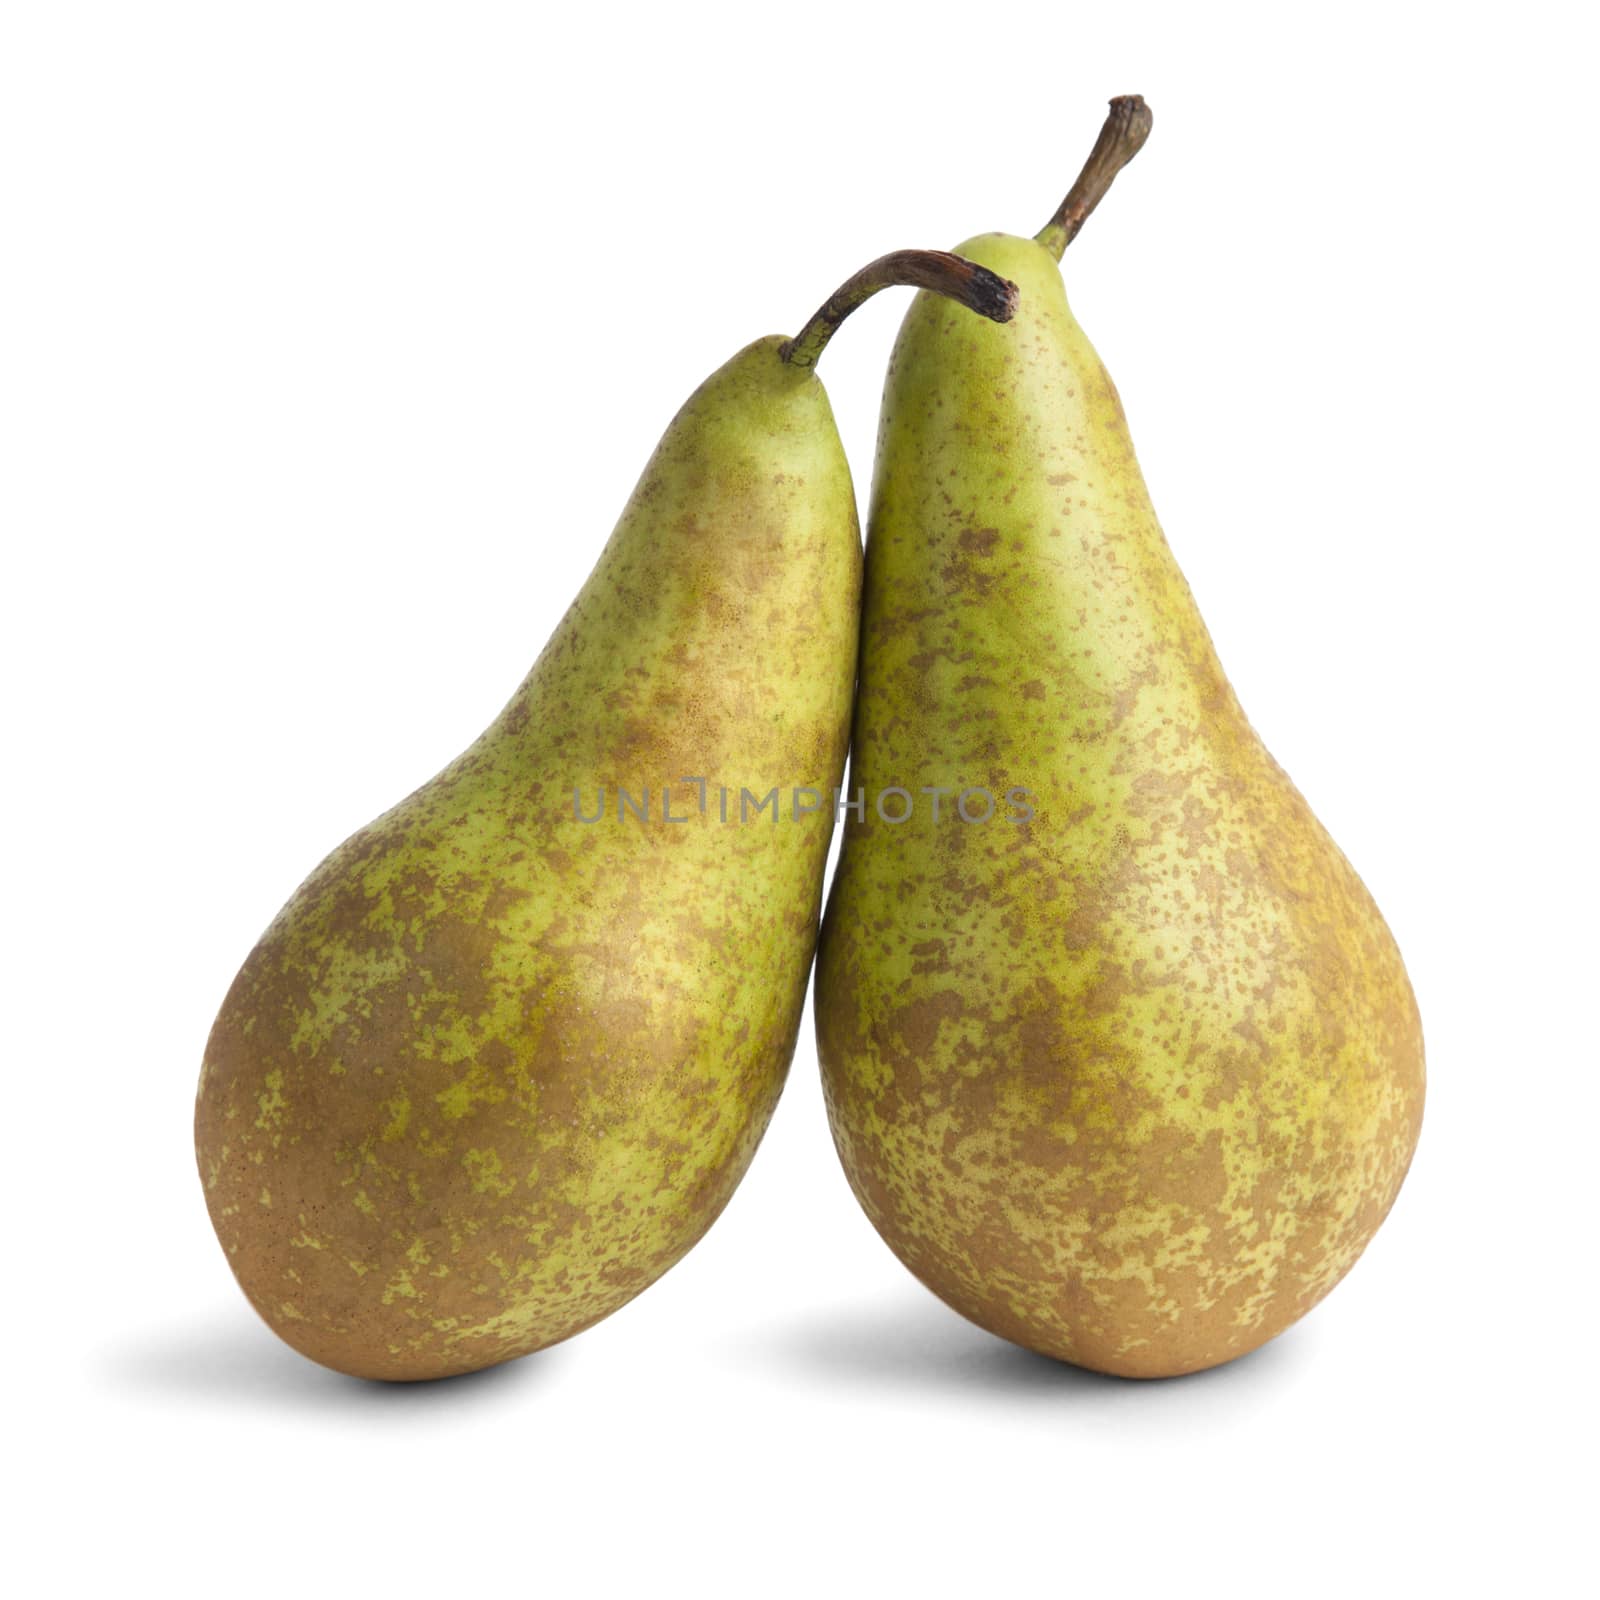 two pears by anelina